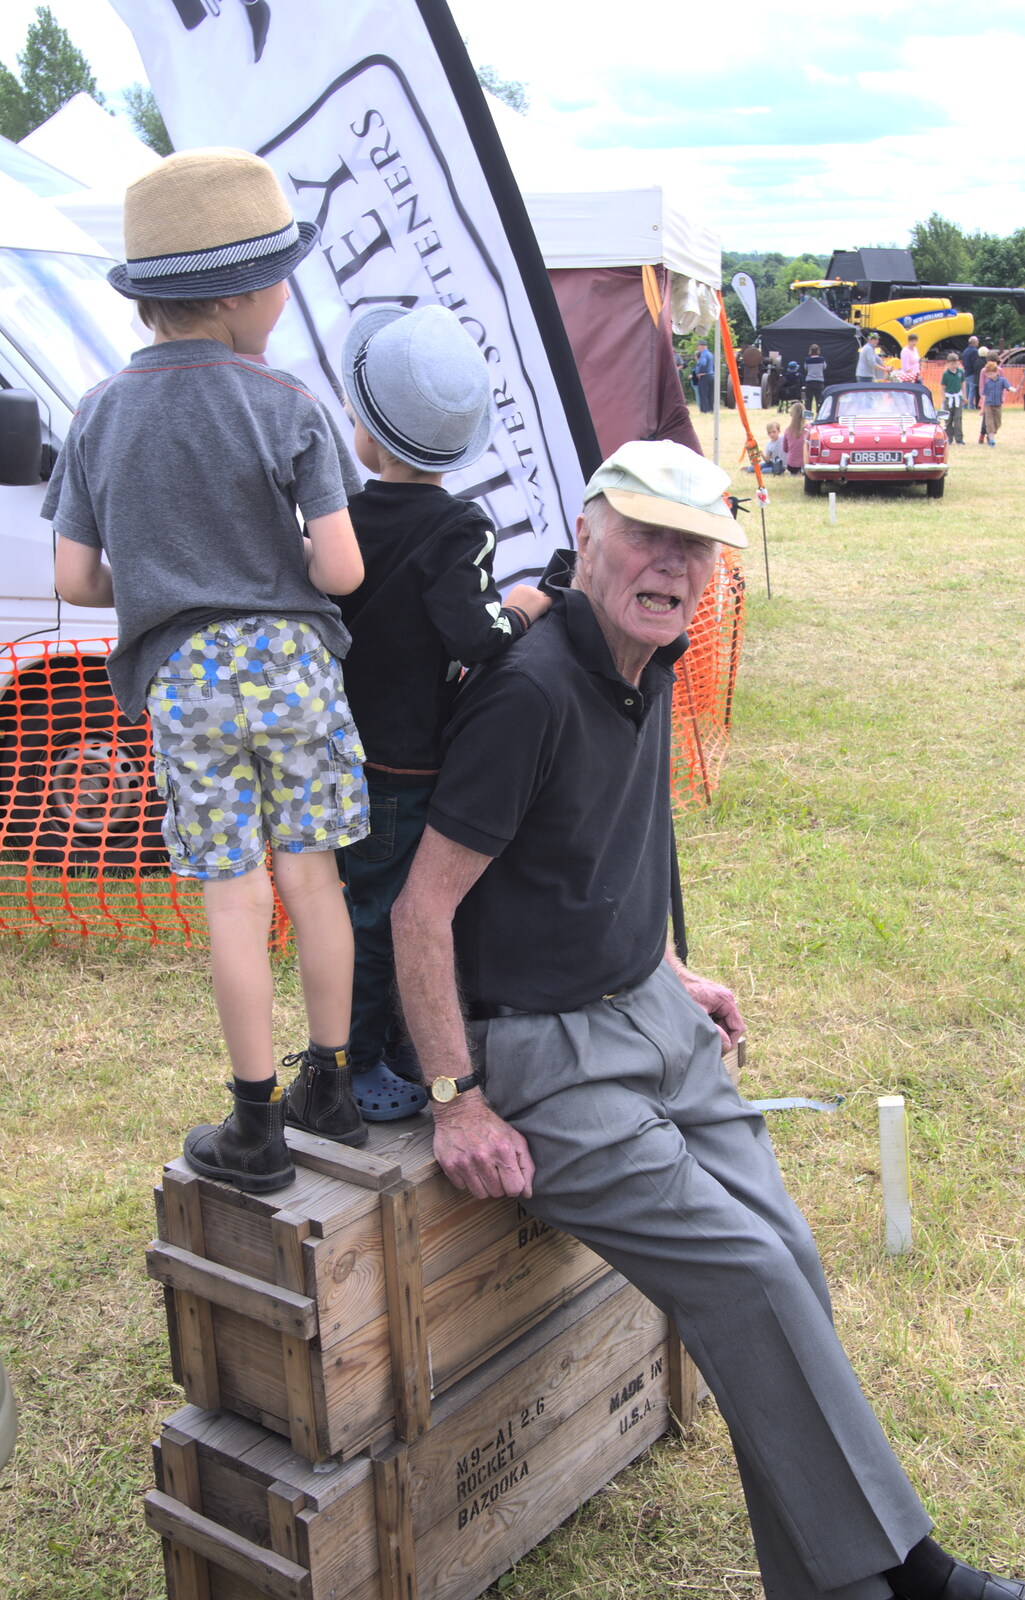 The boys stand on some crates from A Vintage Tractorey Sort of Day, Palgrave, Suffolk - 21st June 2015